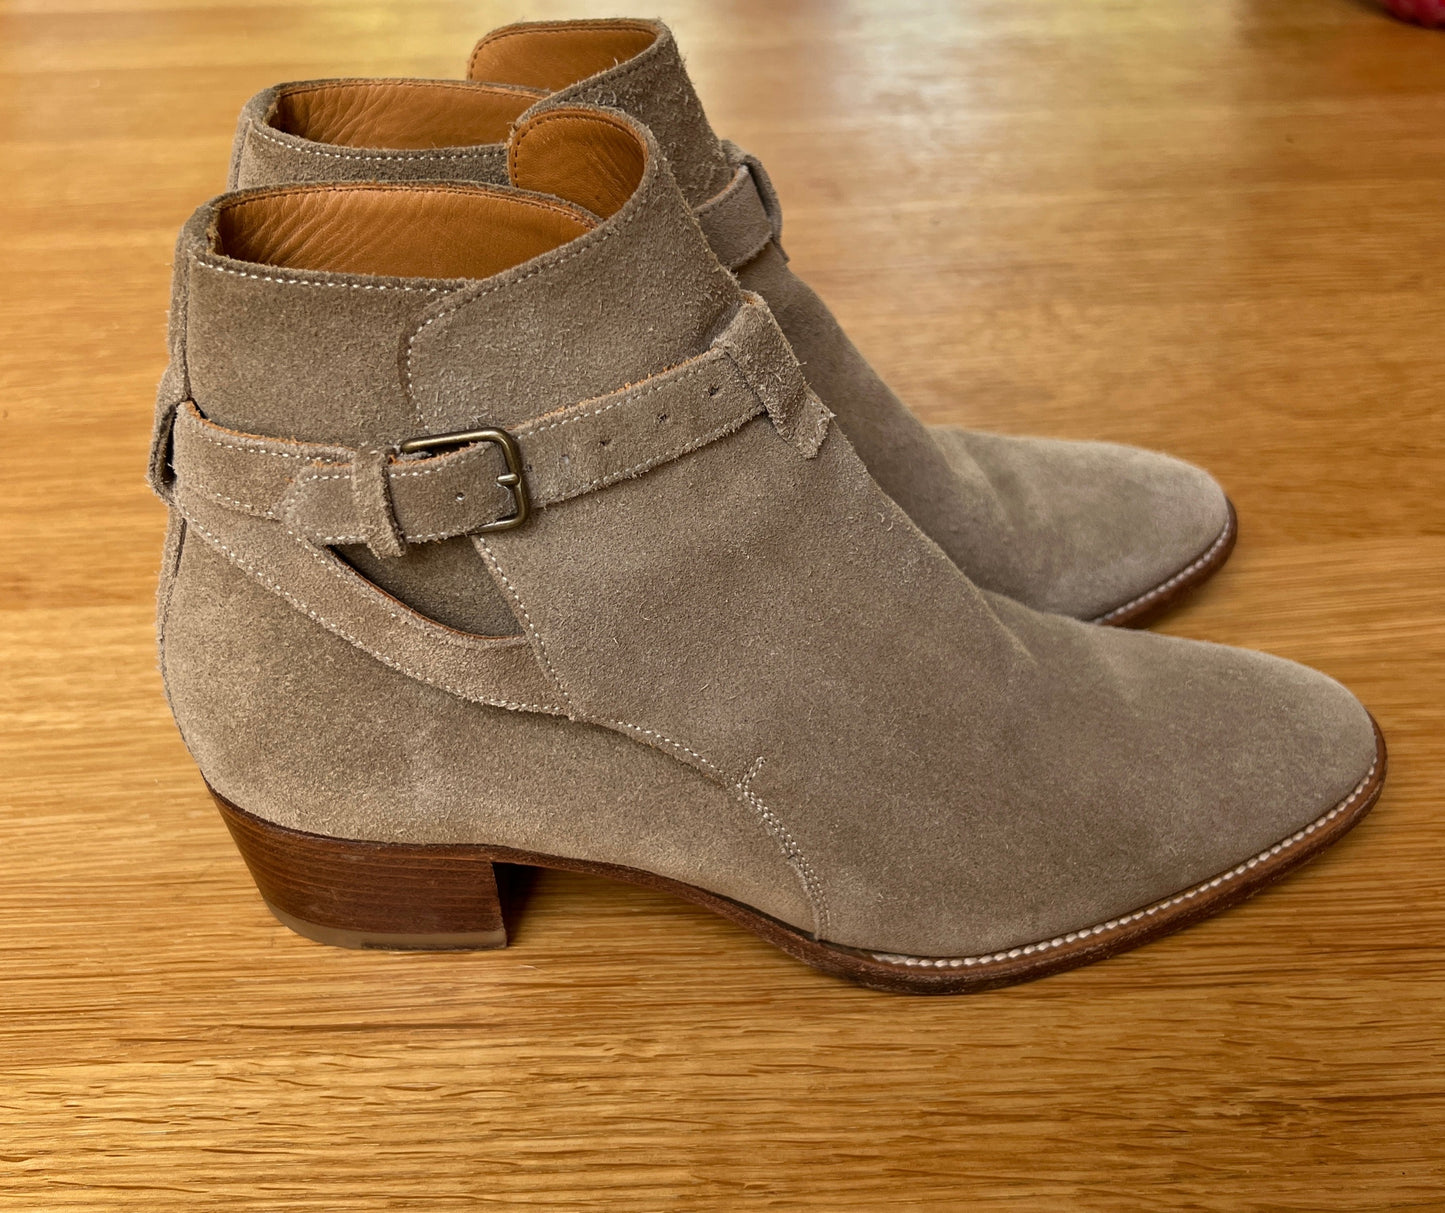 Tan Suede Leather Boots - 7.5